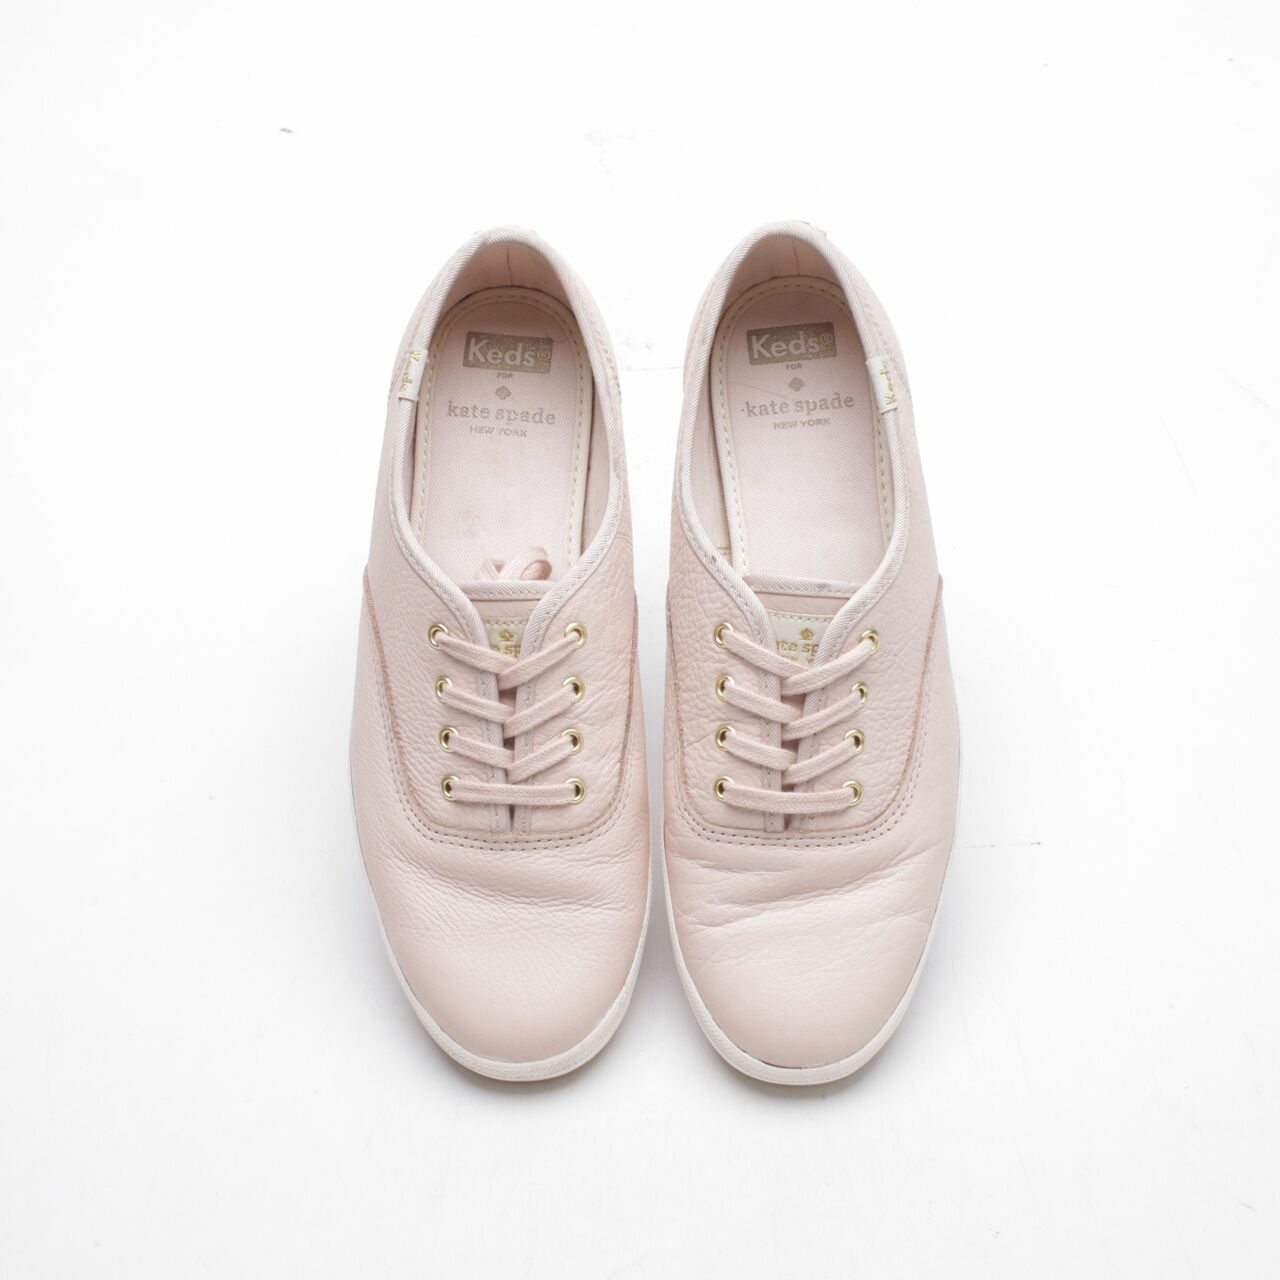 Keds For Kate Spade Leather Rose Sneakers